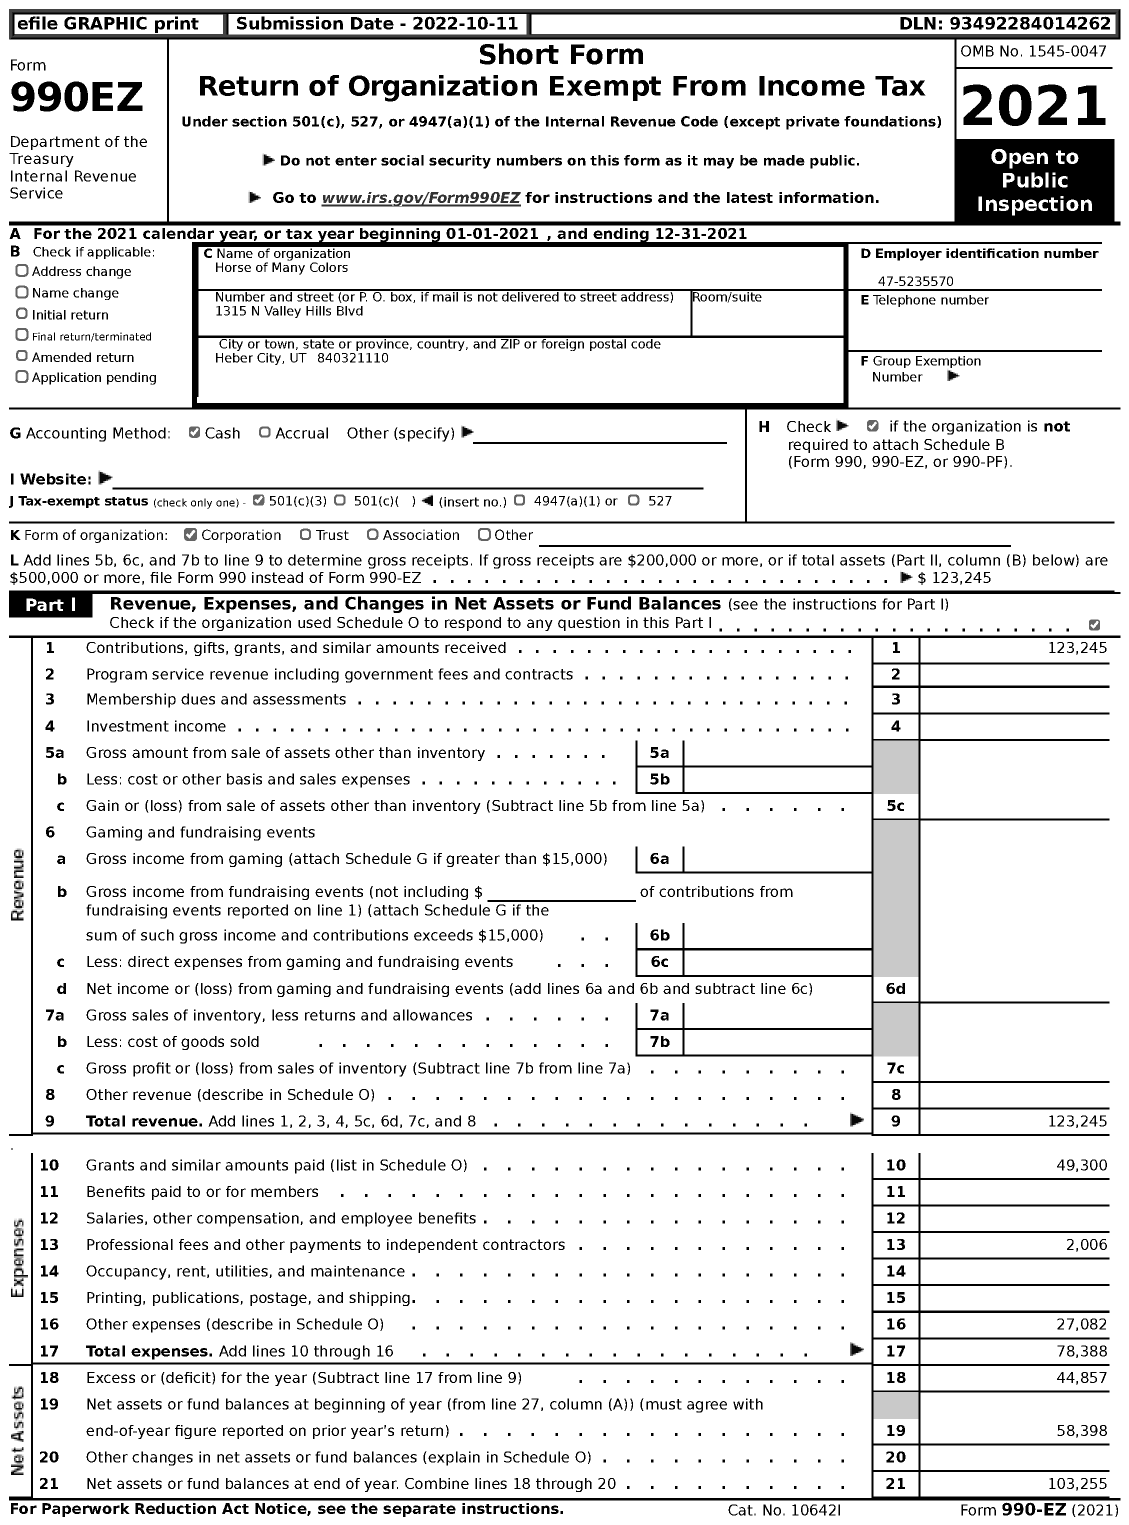 Image of first page of 2021 Form 990EZ for Horse of Many Colors